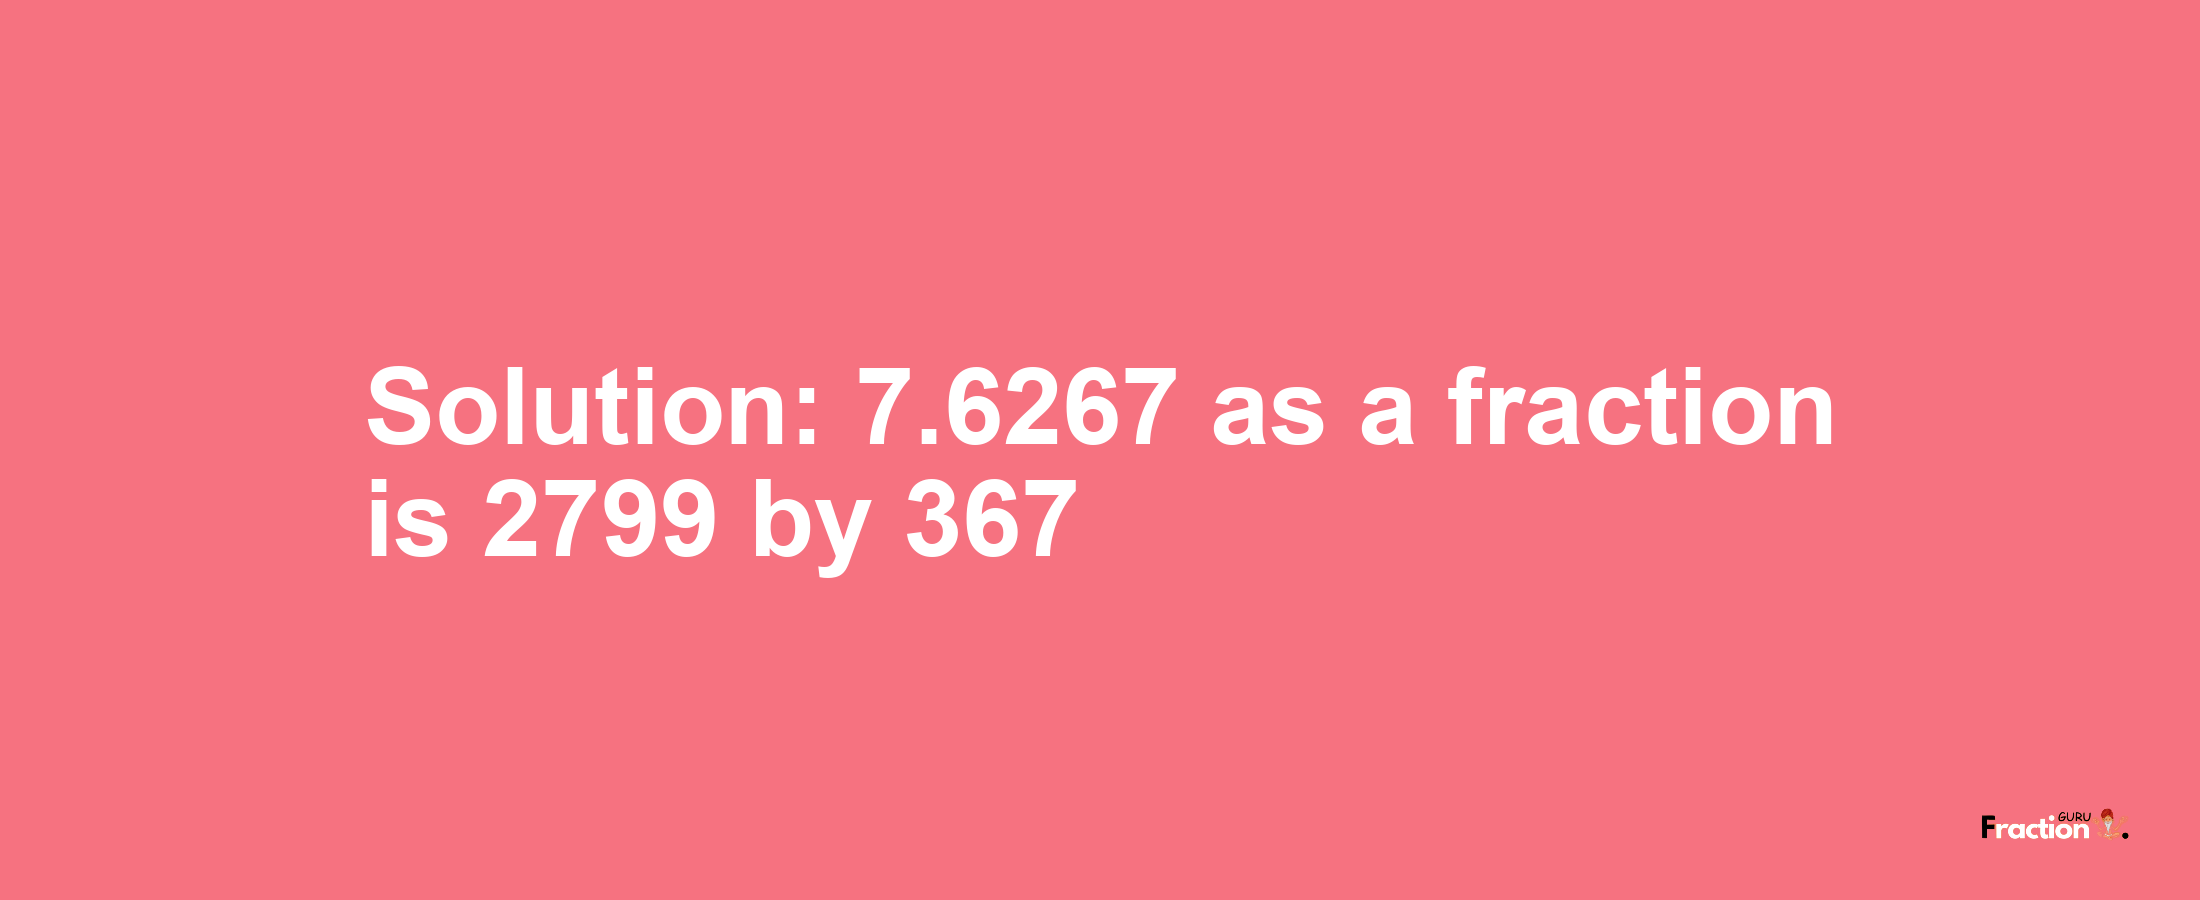 Solution:7.6267 as a fraction is 2799/367